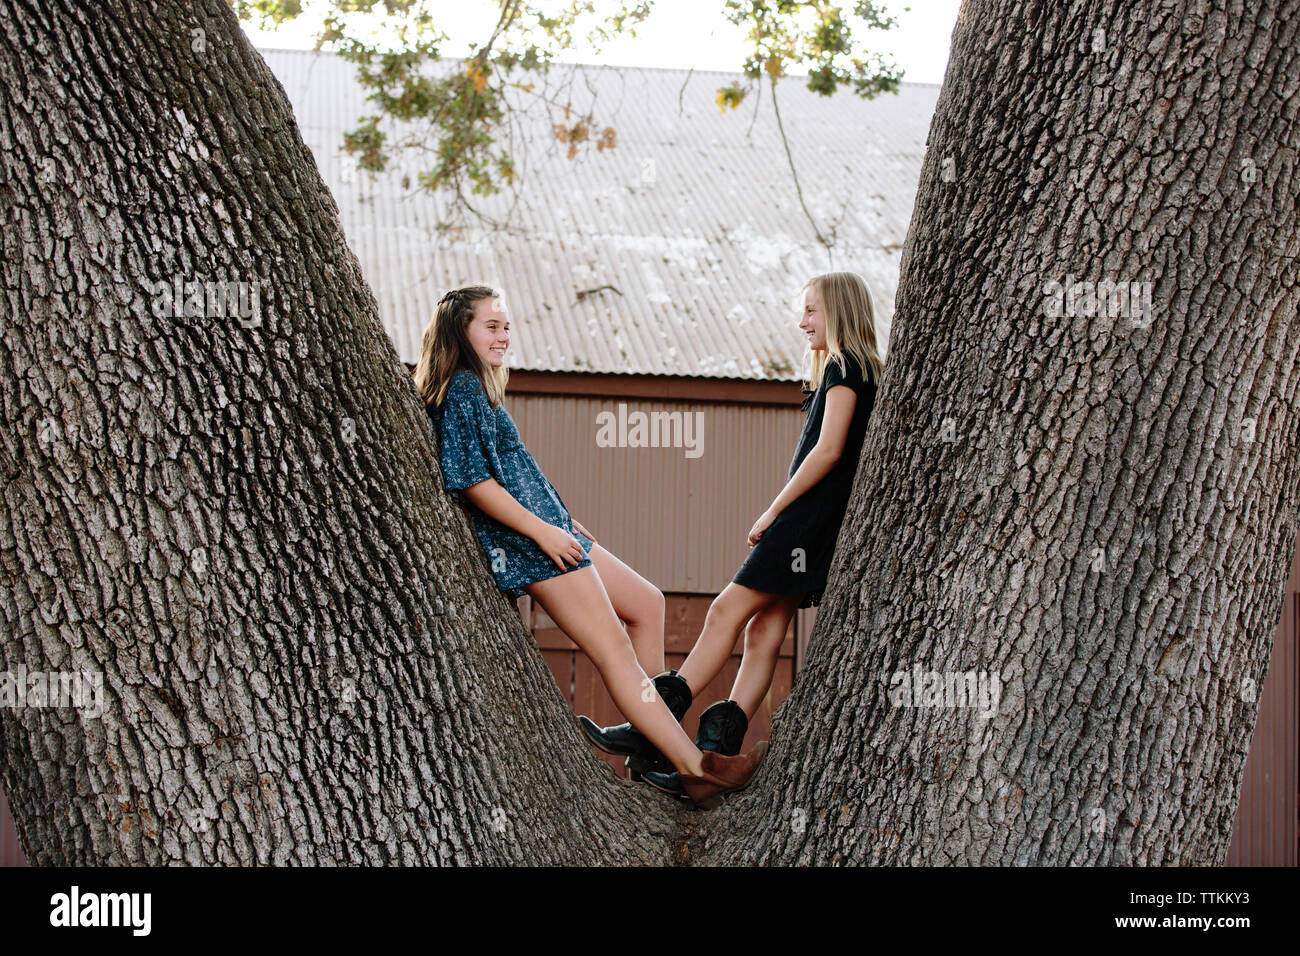 Playful sisters leaning on tree trunk at farm Stock Photo